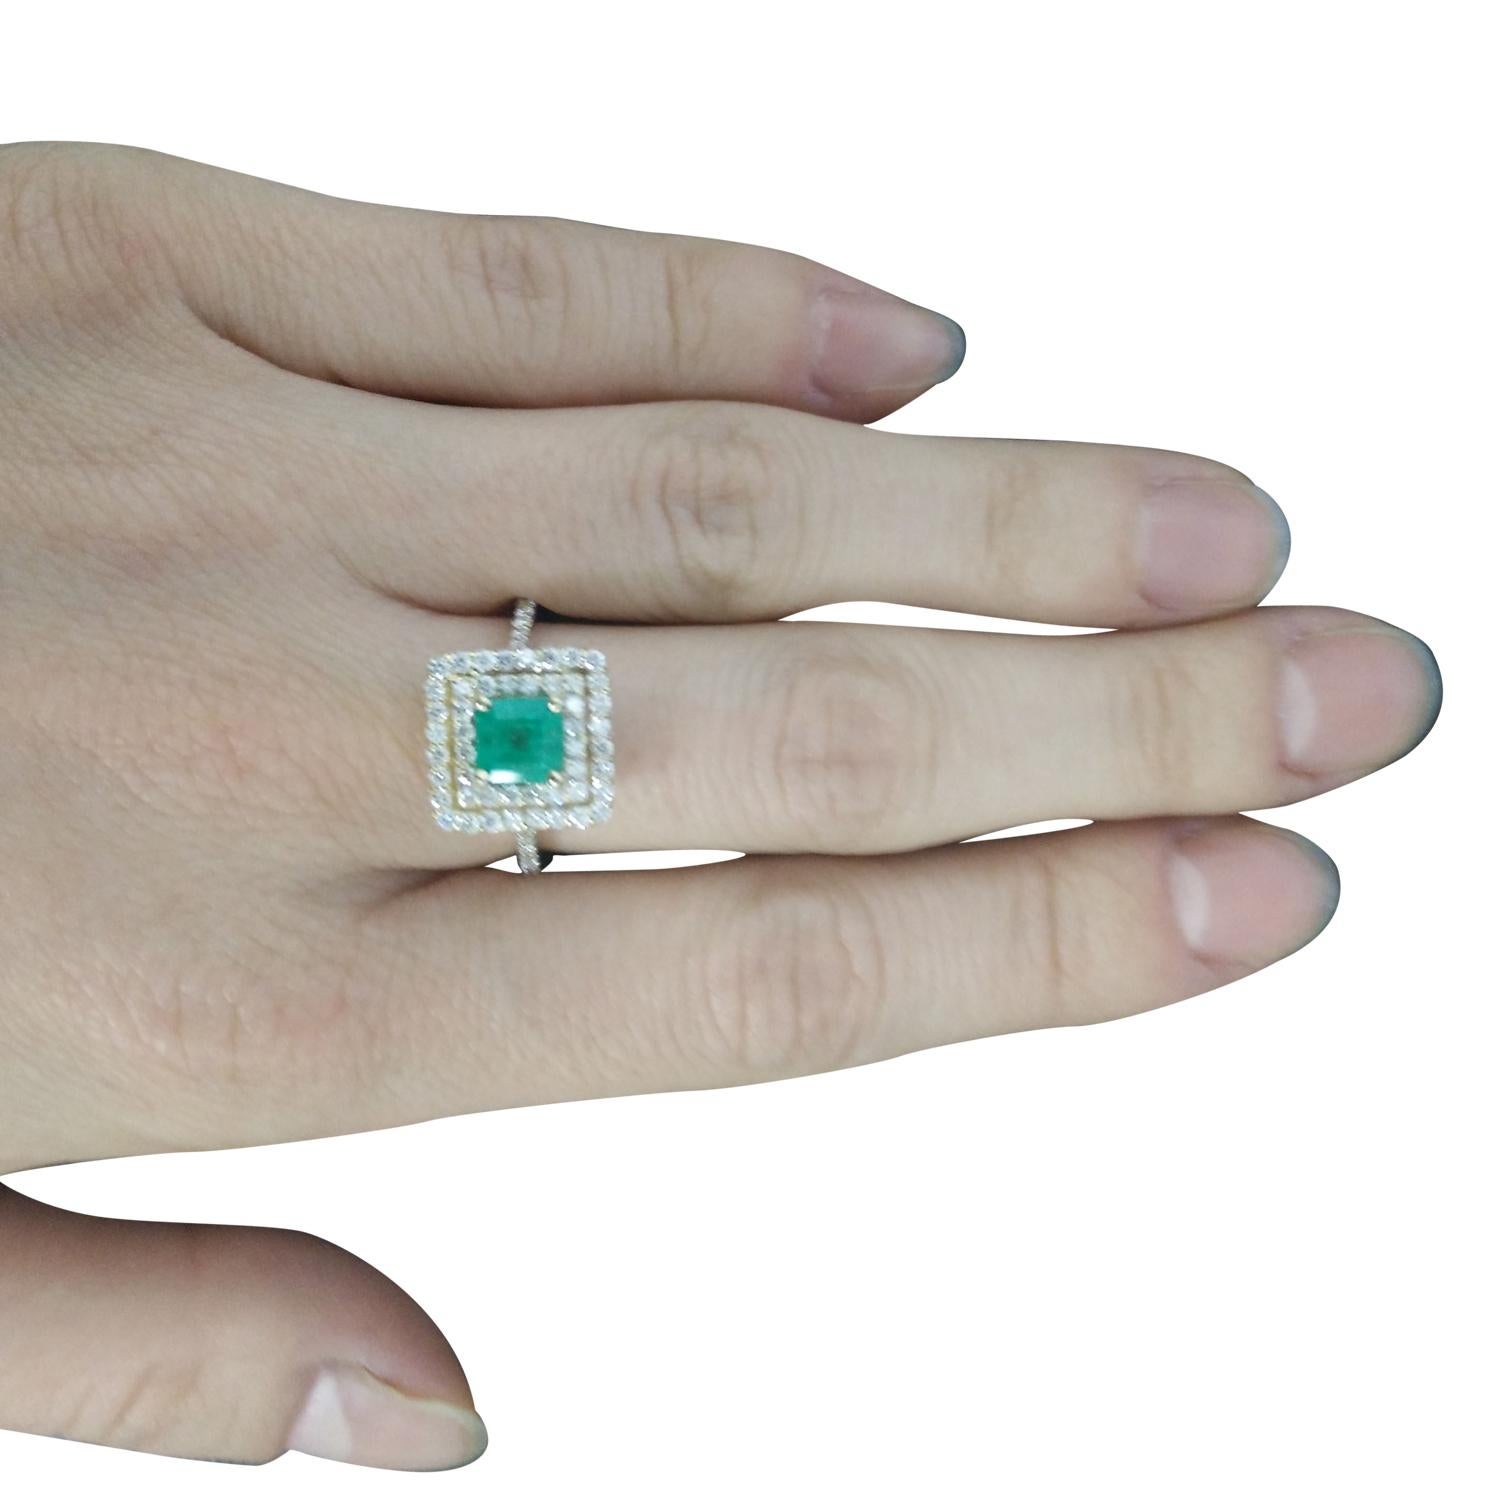 1.55 Carat Natural Emerald 14 Karat Solid Yellow Gold Diamond Ring
Stamped: 14K 
Ring Size: 7 
Total Ring Weight: 4.2 Grams 
Emerald Weight: 0.85 Carat (5.50x5.50 Millimeters)  
Color: Green
Shape: Emerald 
Treatment: Oiling
Diamond Weight: 0.70